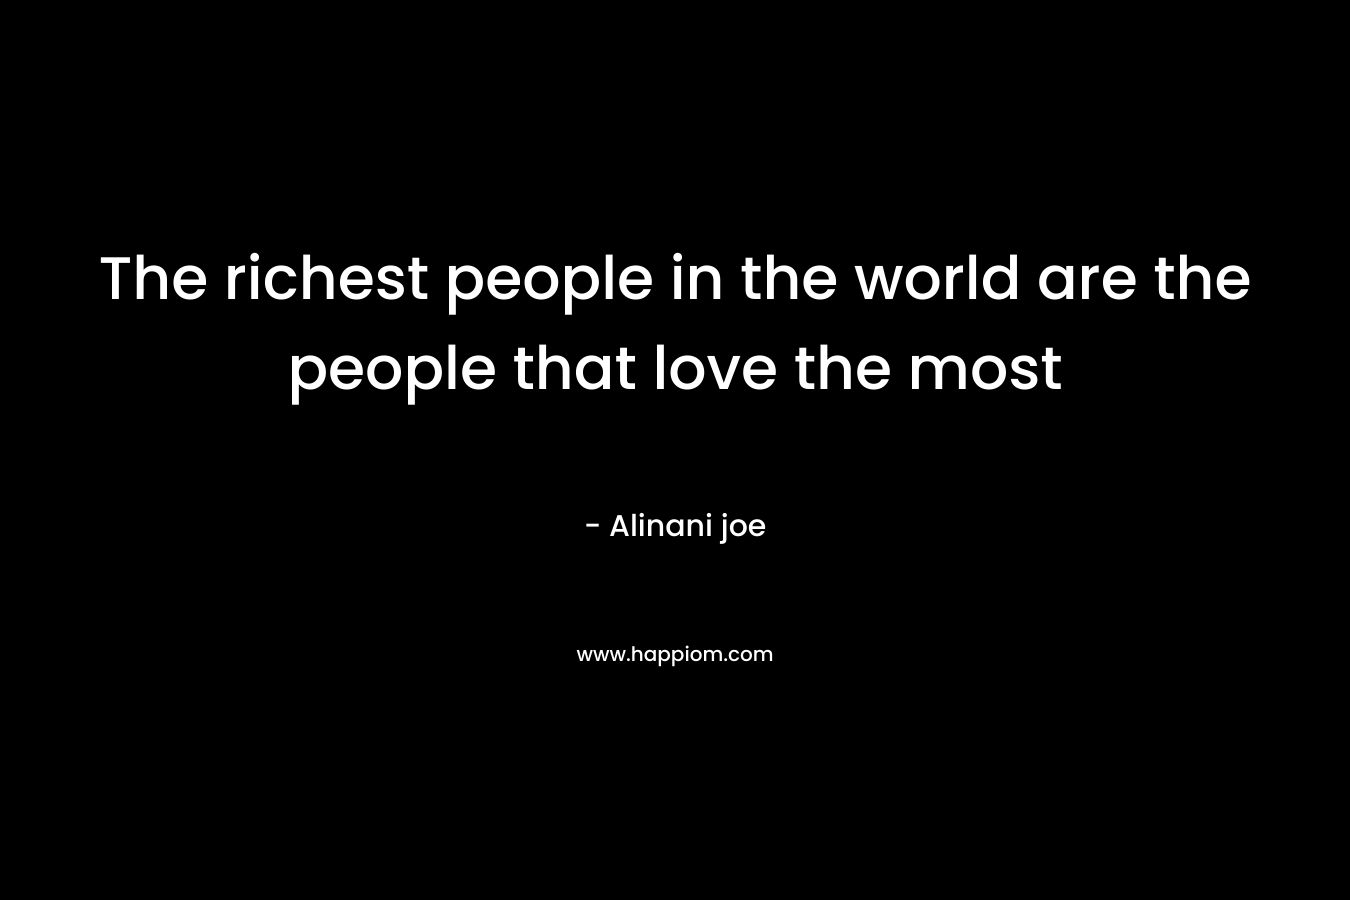 The richest people in the world are the people that love the most